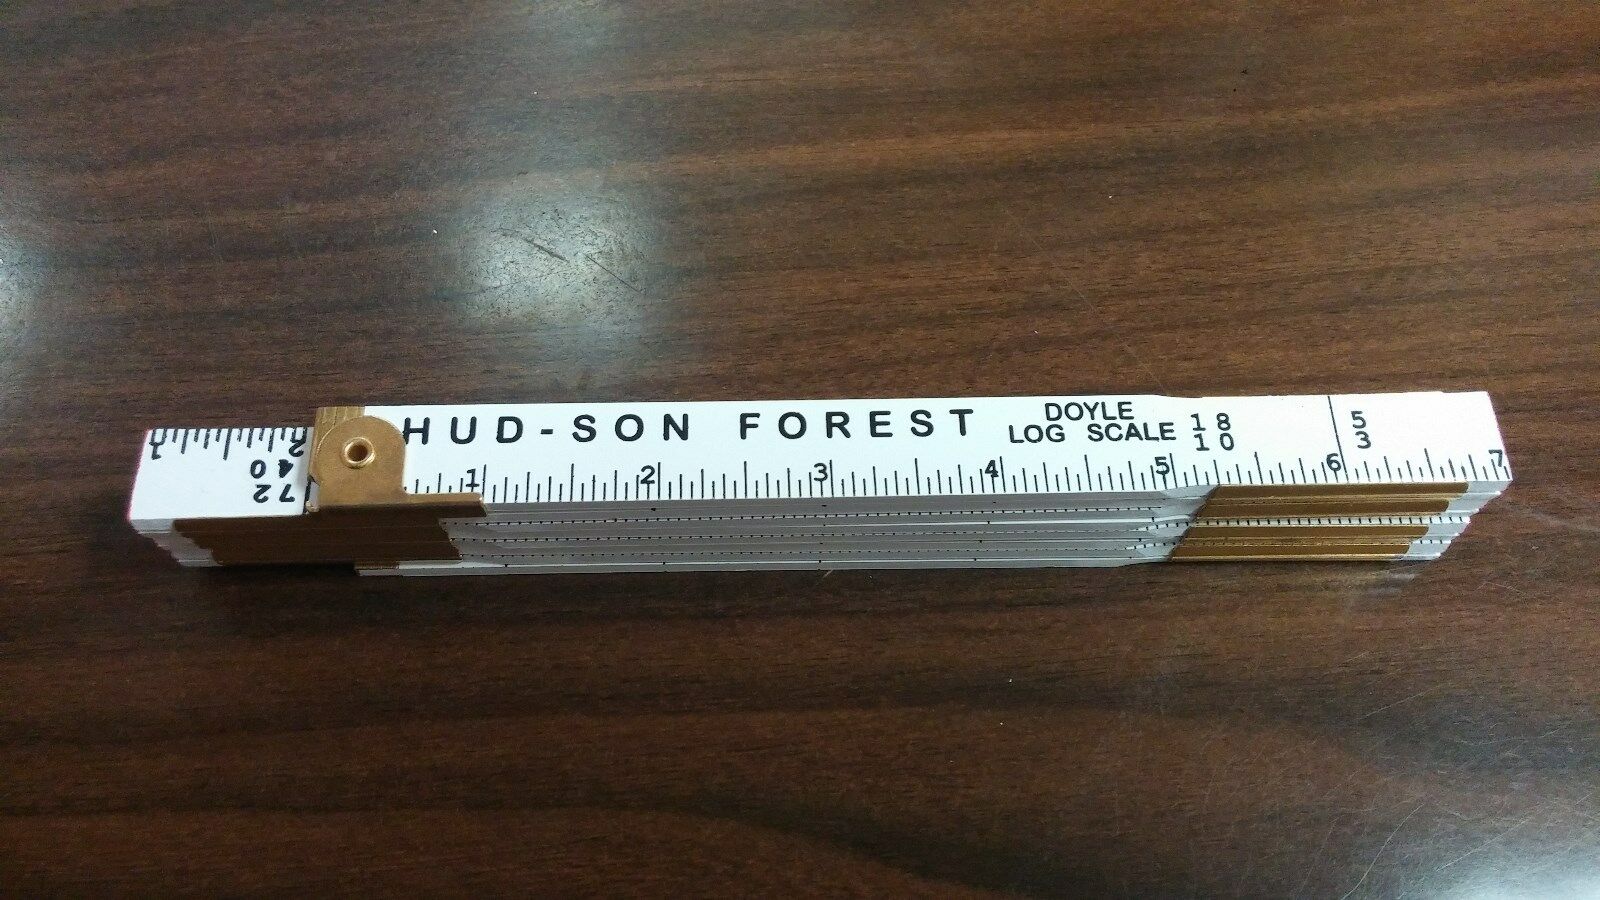 Hud-son Doyle Log Ruler Log Scale Band Mill Saw Mill Forestry Sawmilling #dlr